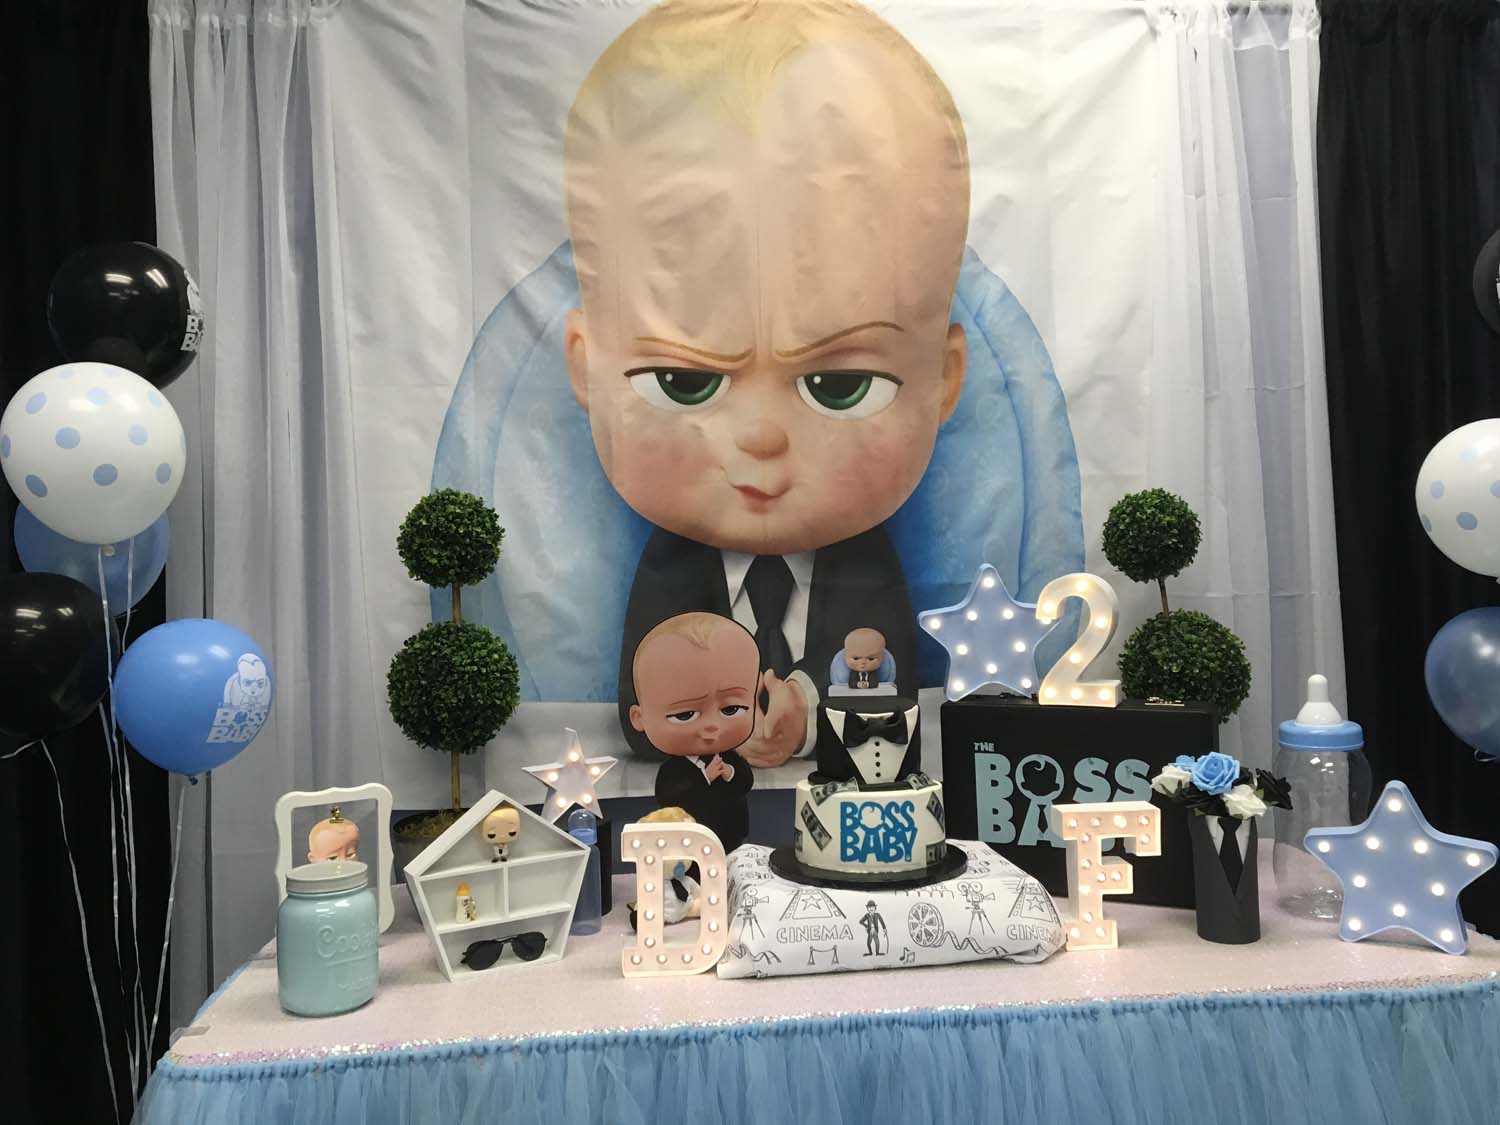 Boss Baby Birthday Party Theme Held At Indoor Playground Princesses Princes